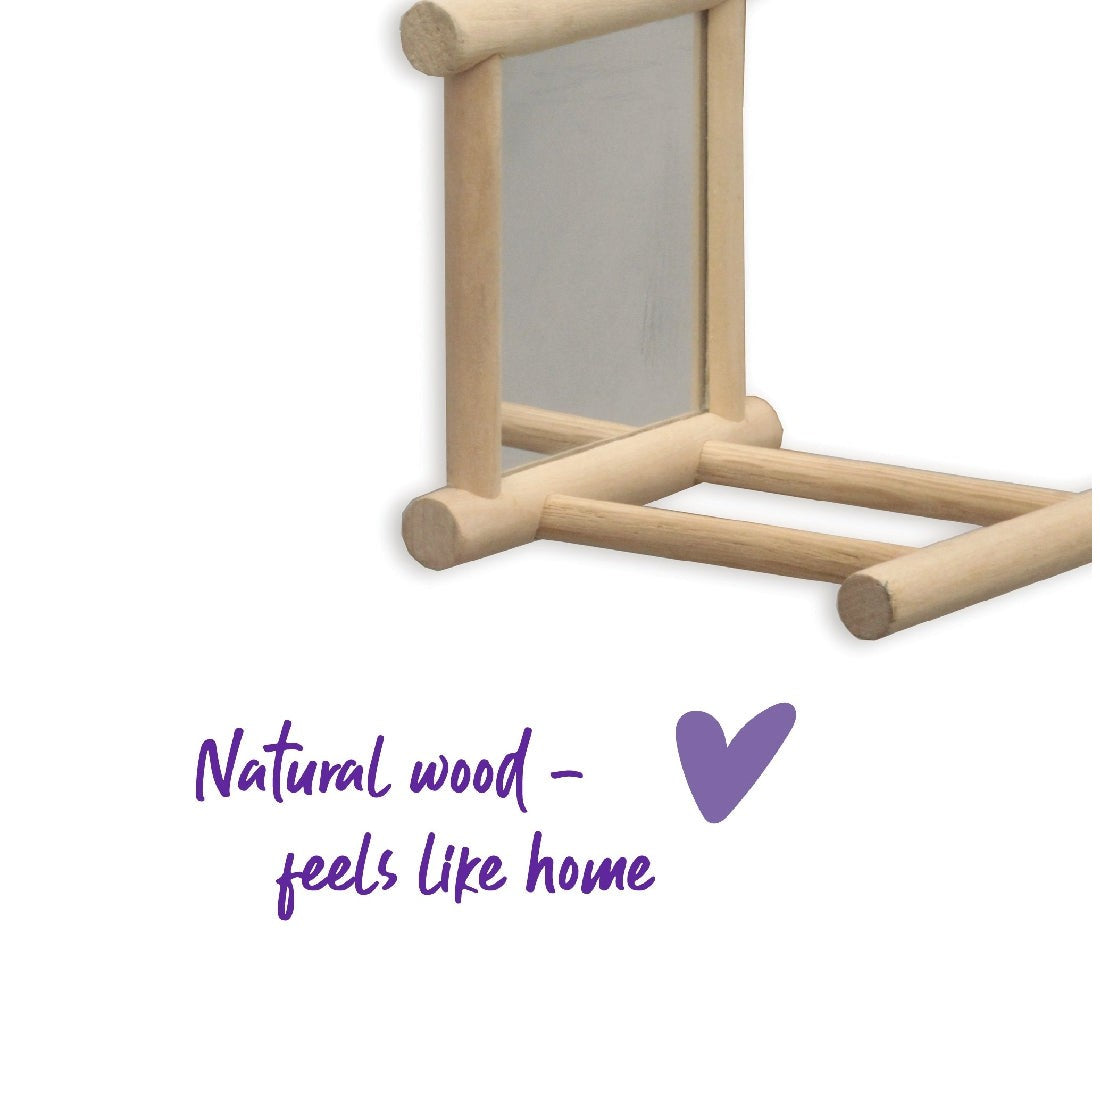 Wooden bird toy stand with text "Natural wood - feels like home".